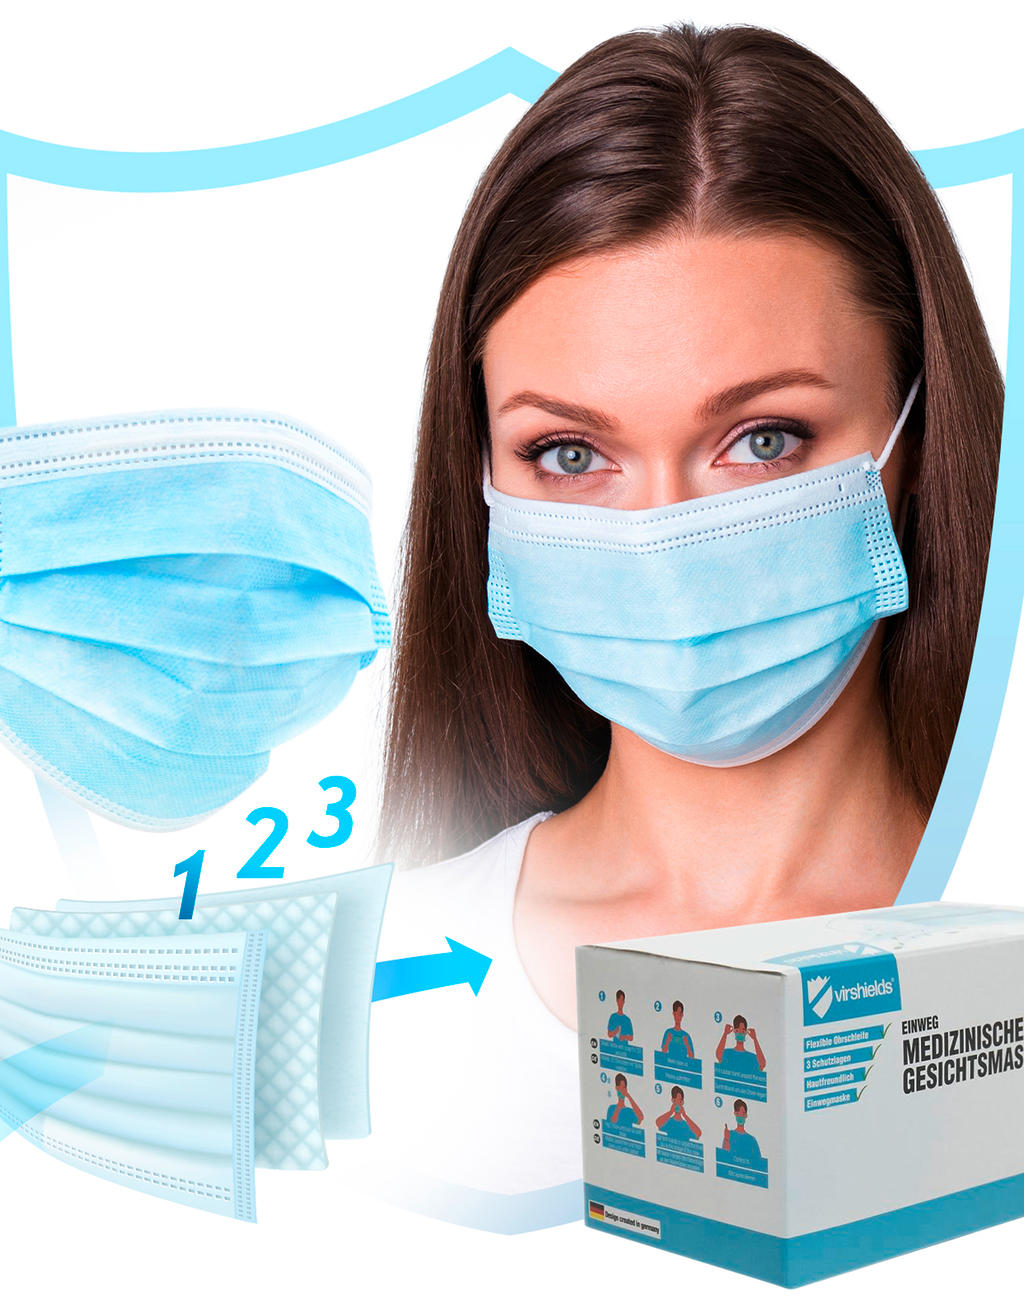  Disposable Face Mask in Farbe Blue